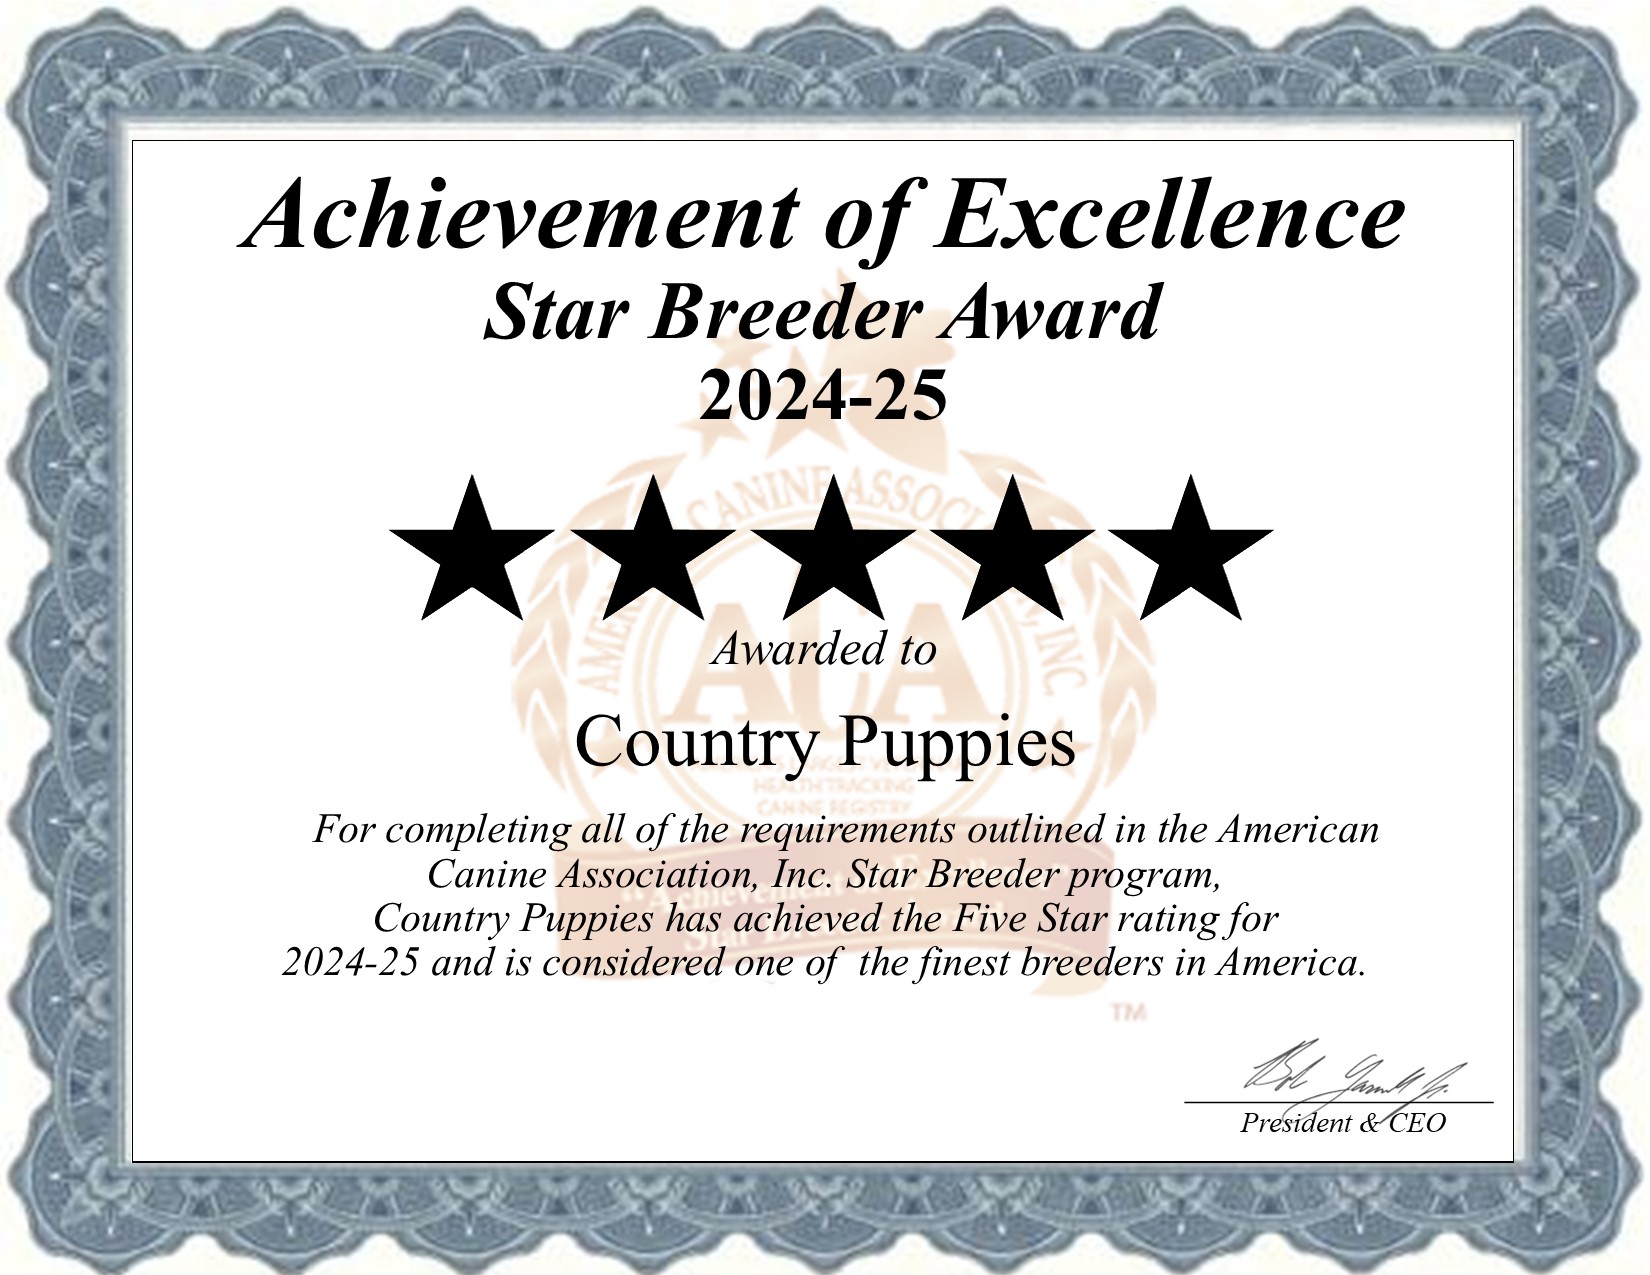 Country, Puppies, dog, breeder, star, certificate, Country-Puppies, Alton, IA, Iowa, puppy, dog, kennels, mill, puppymill, usda, 5-star, aca, ica, registered, Cavapoo